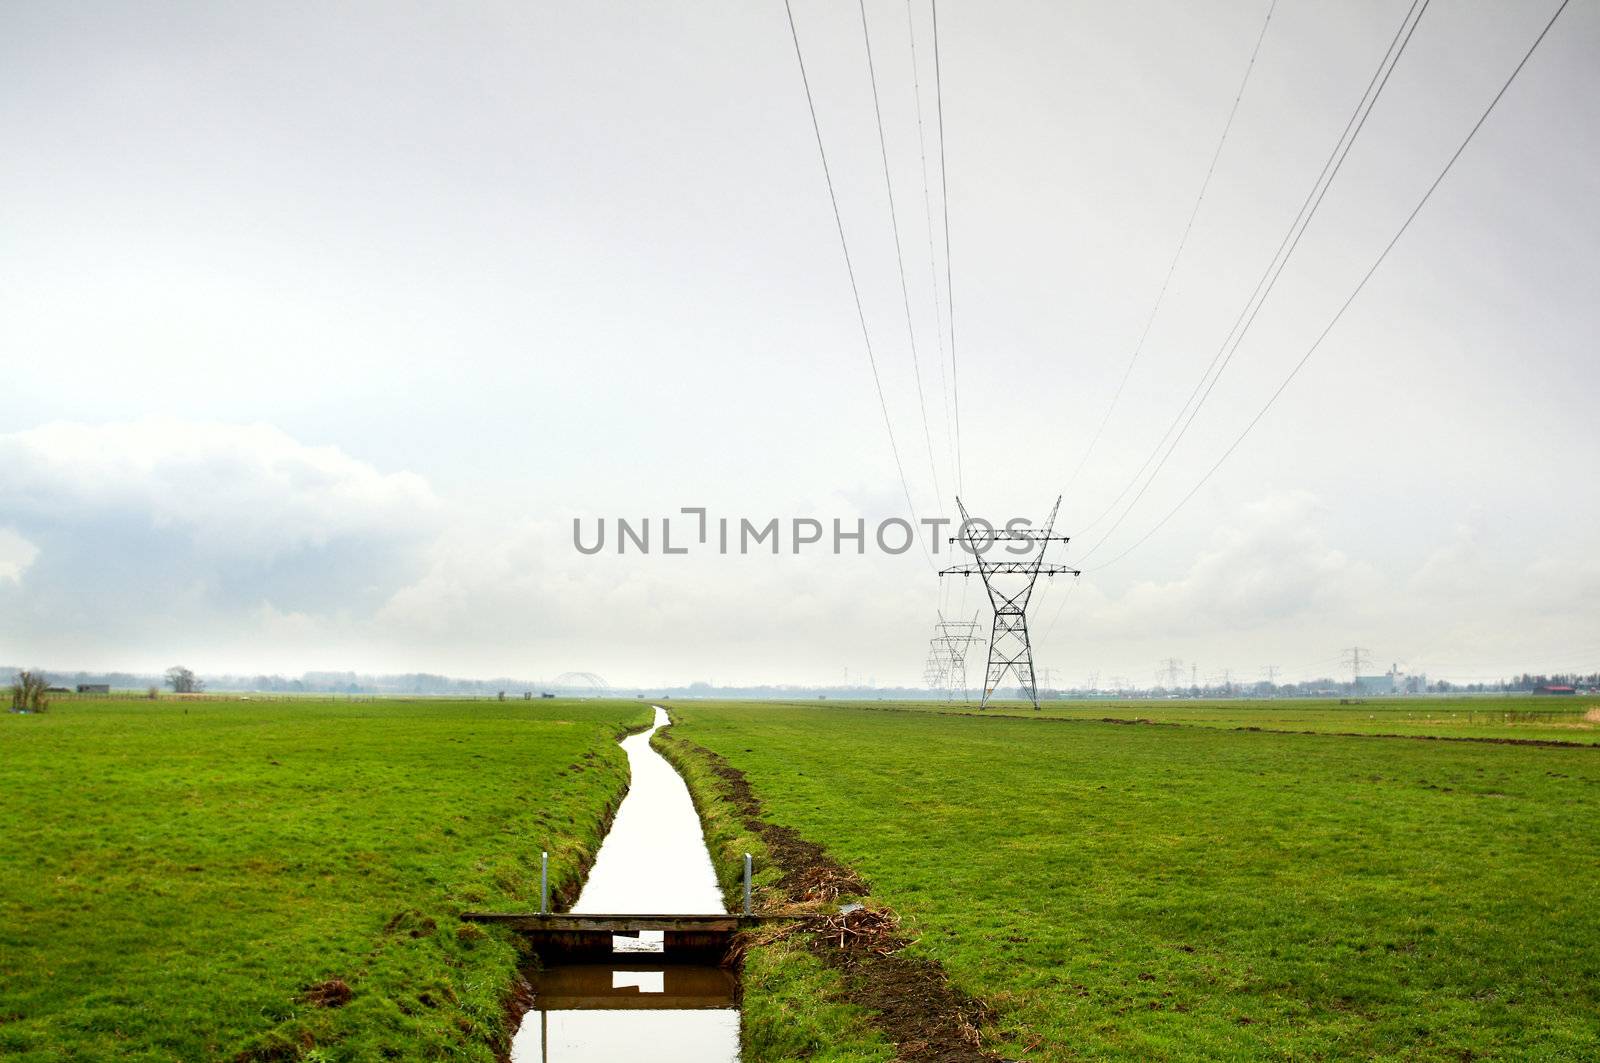 Dutch typical rural flat landscape with channel and high-voltage line 